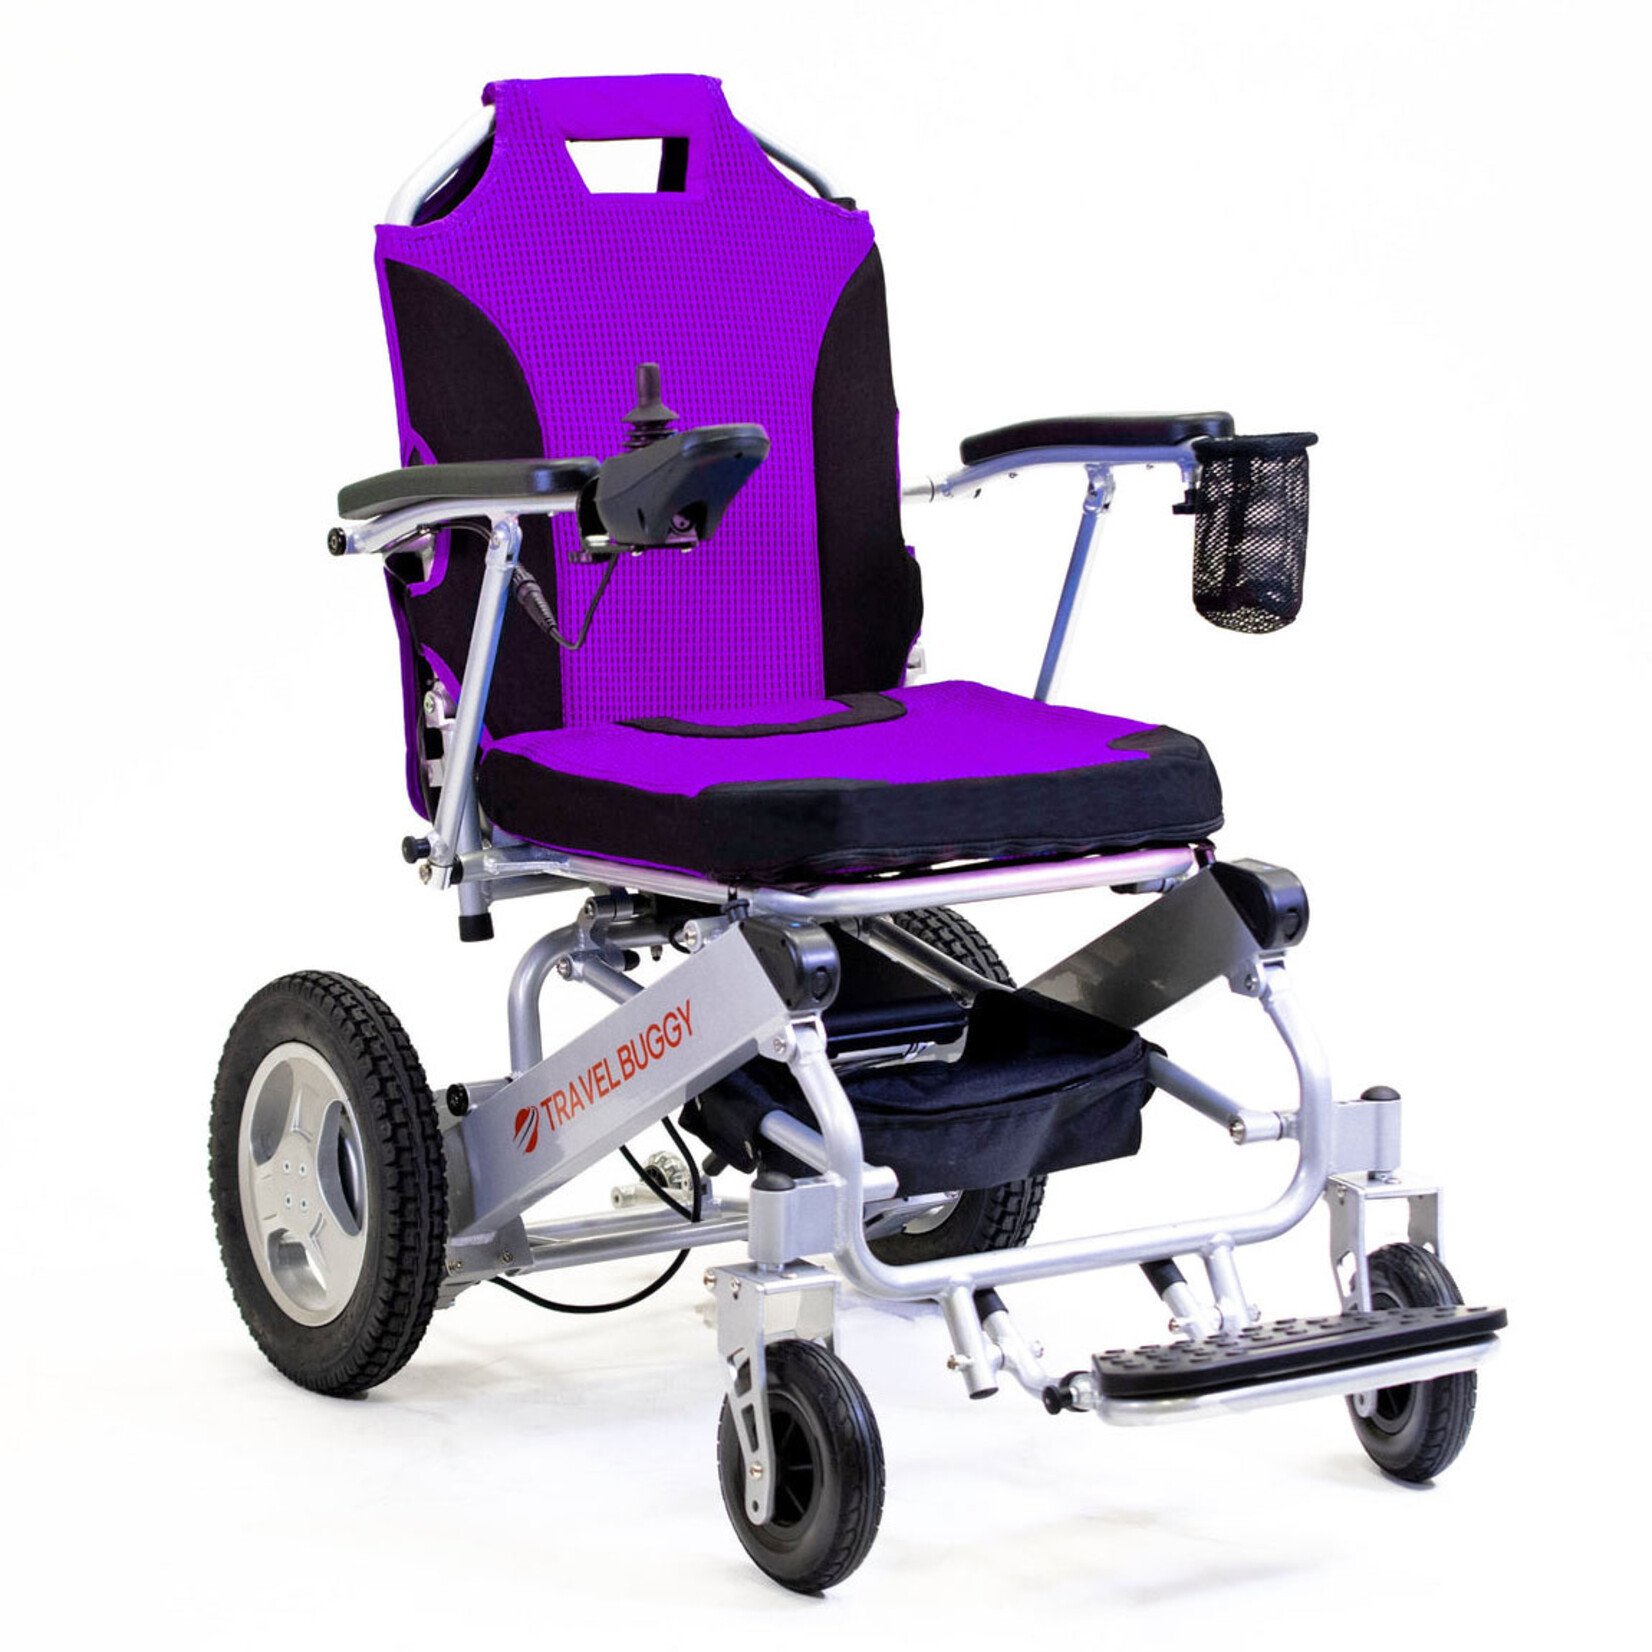 Travel Buggy City 2 Plus Portable Electric Wheelchair